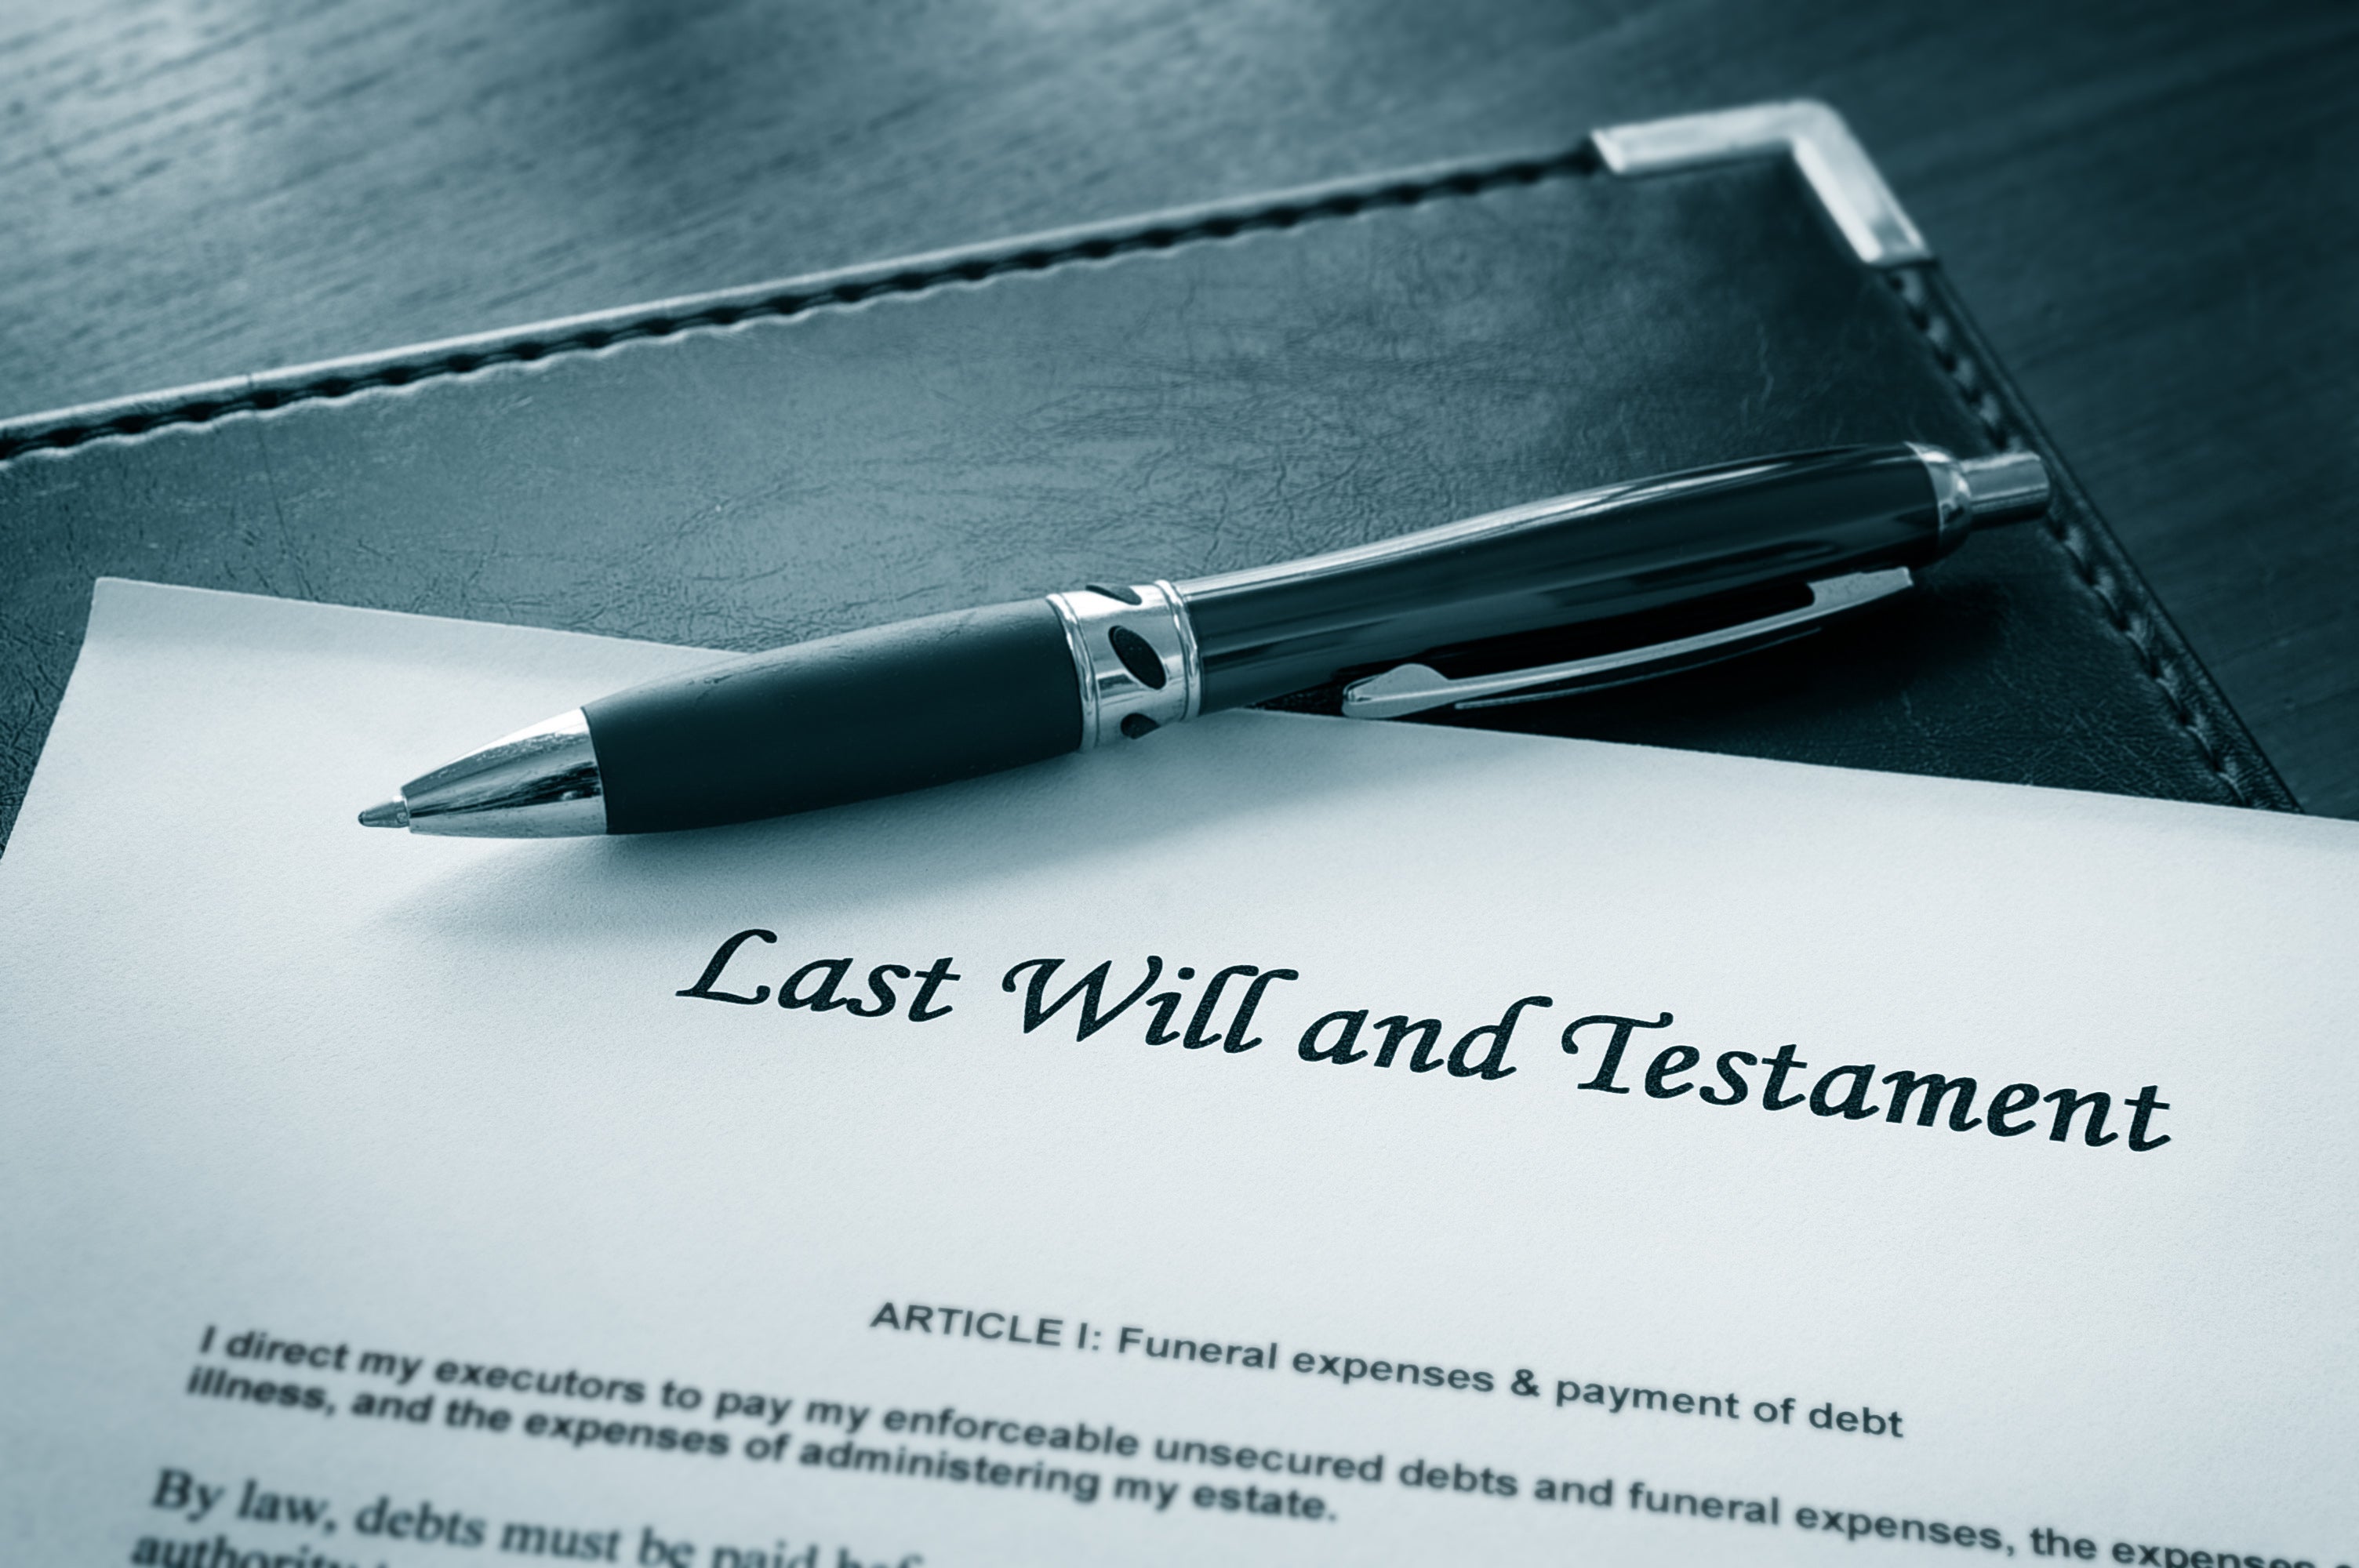 What to do if you have been unfairly left out of a Will